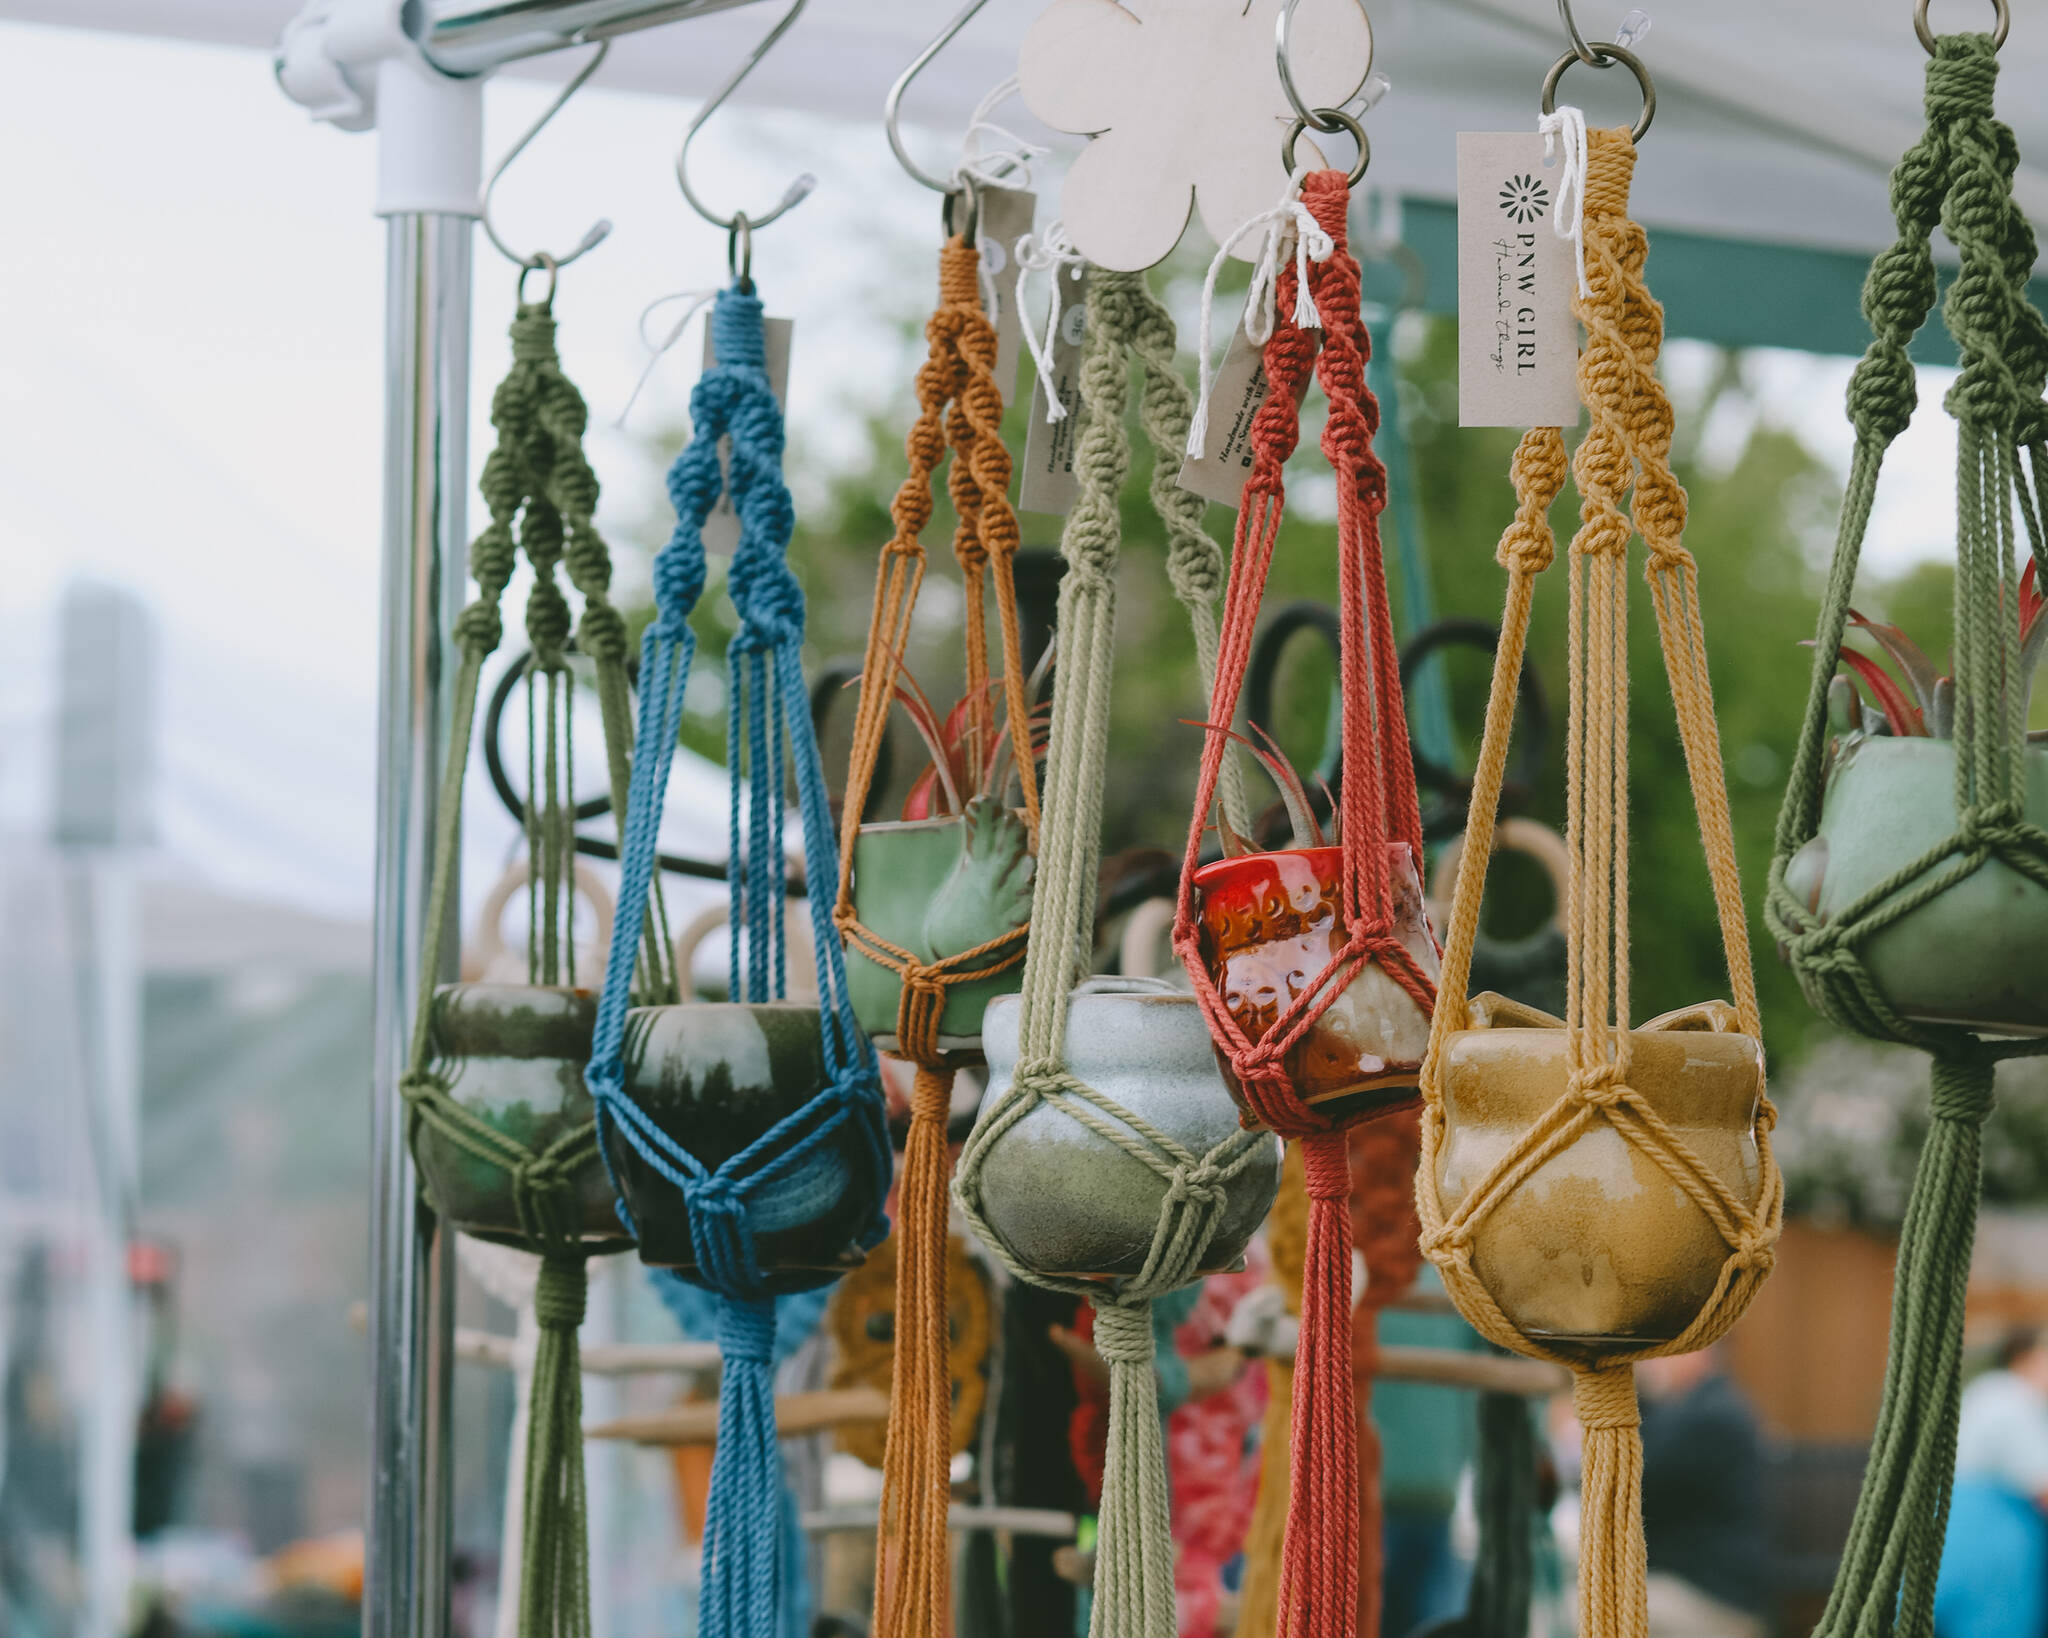 Macrame creations by PNW Girl are one of the many items available each Saturday at the Sequim Farmers and Artisans Market.